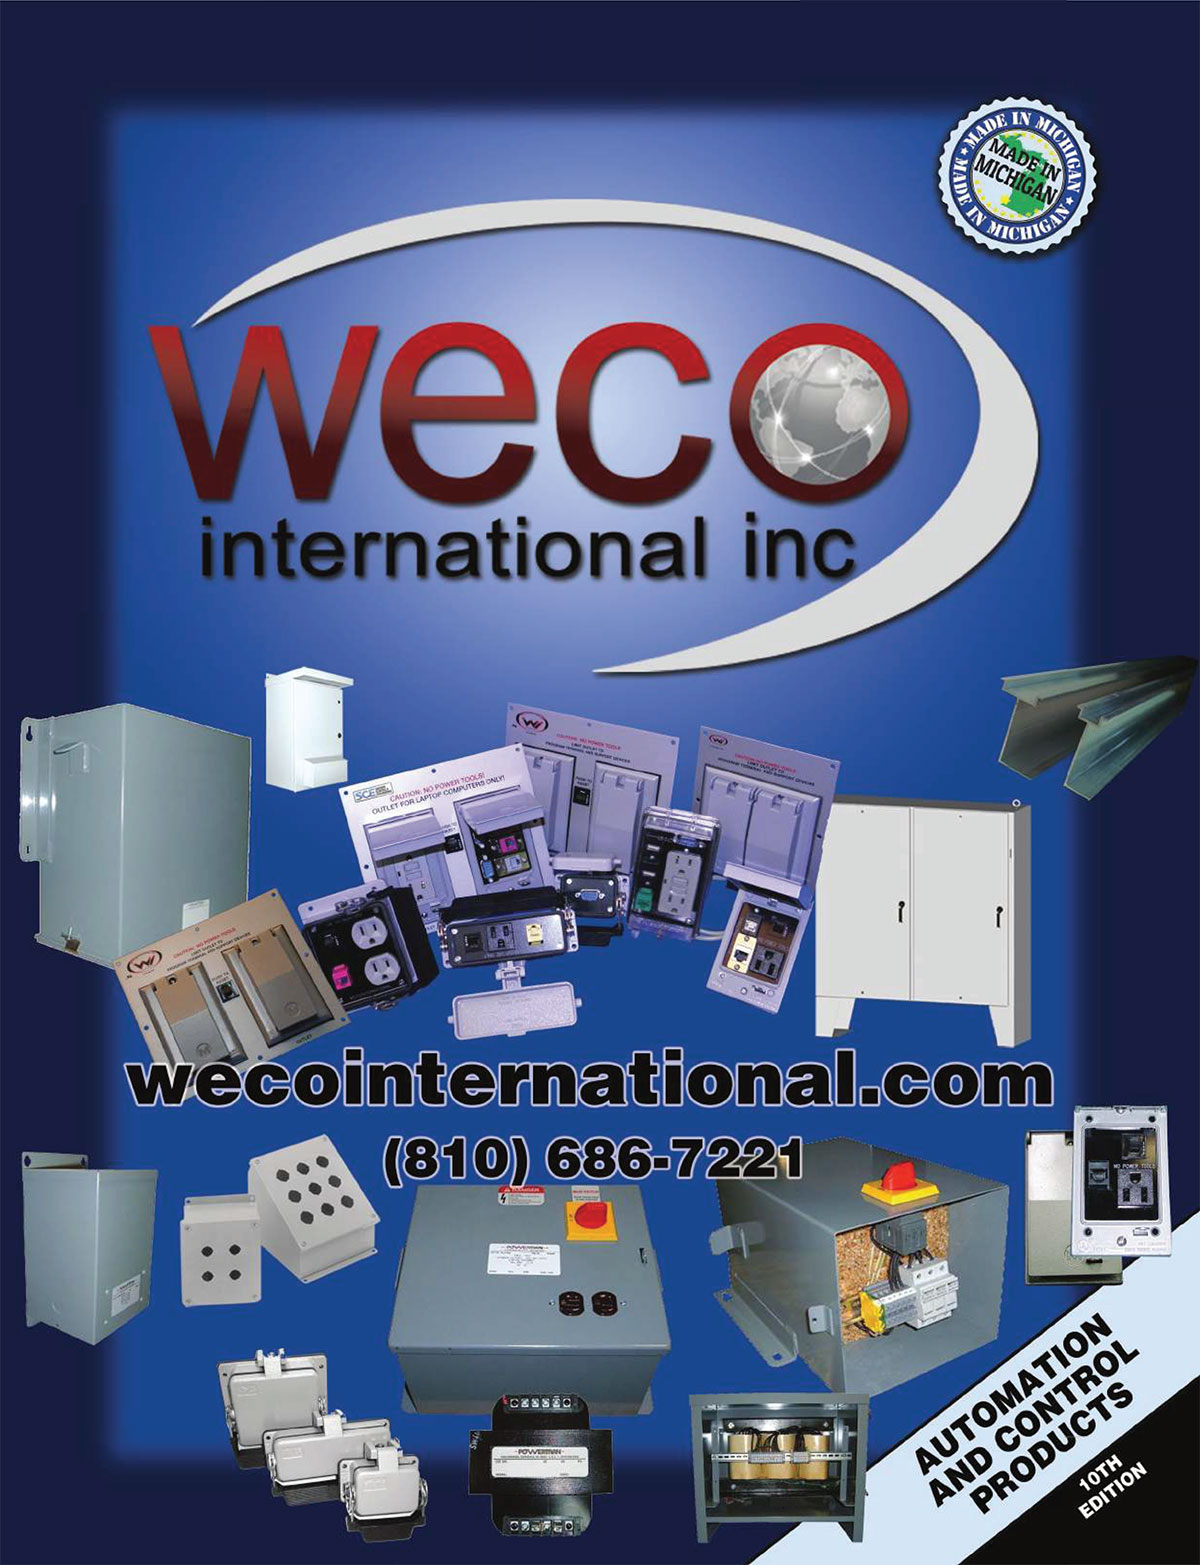 WECO Automation Catalog - infrared heating news & publications